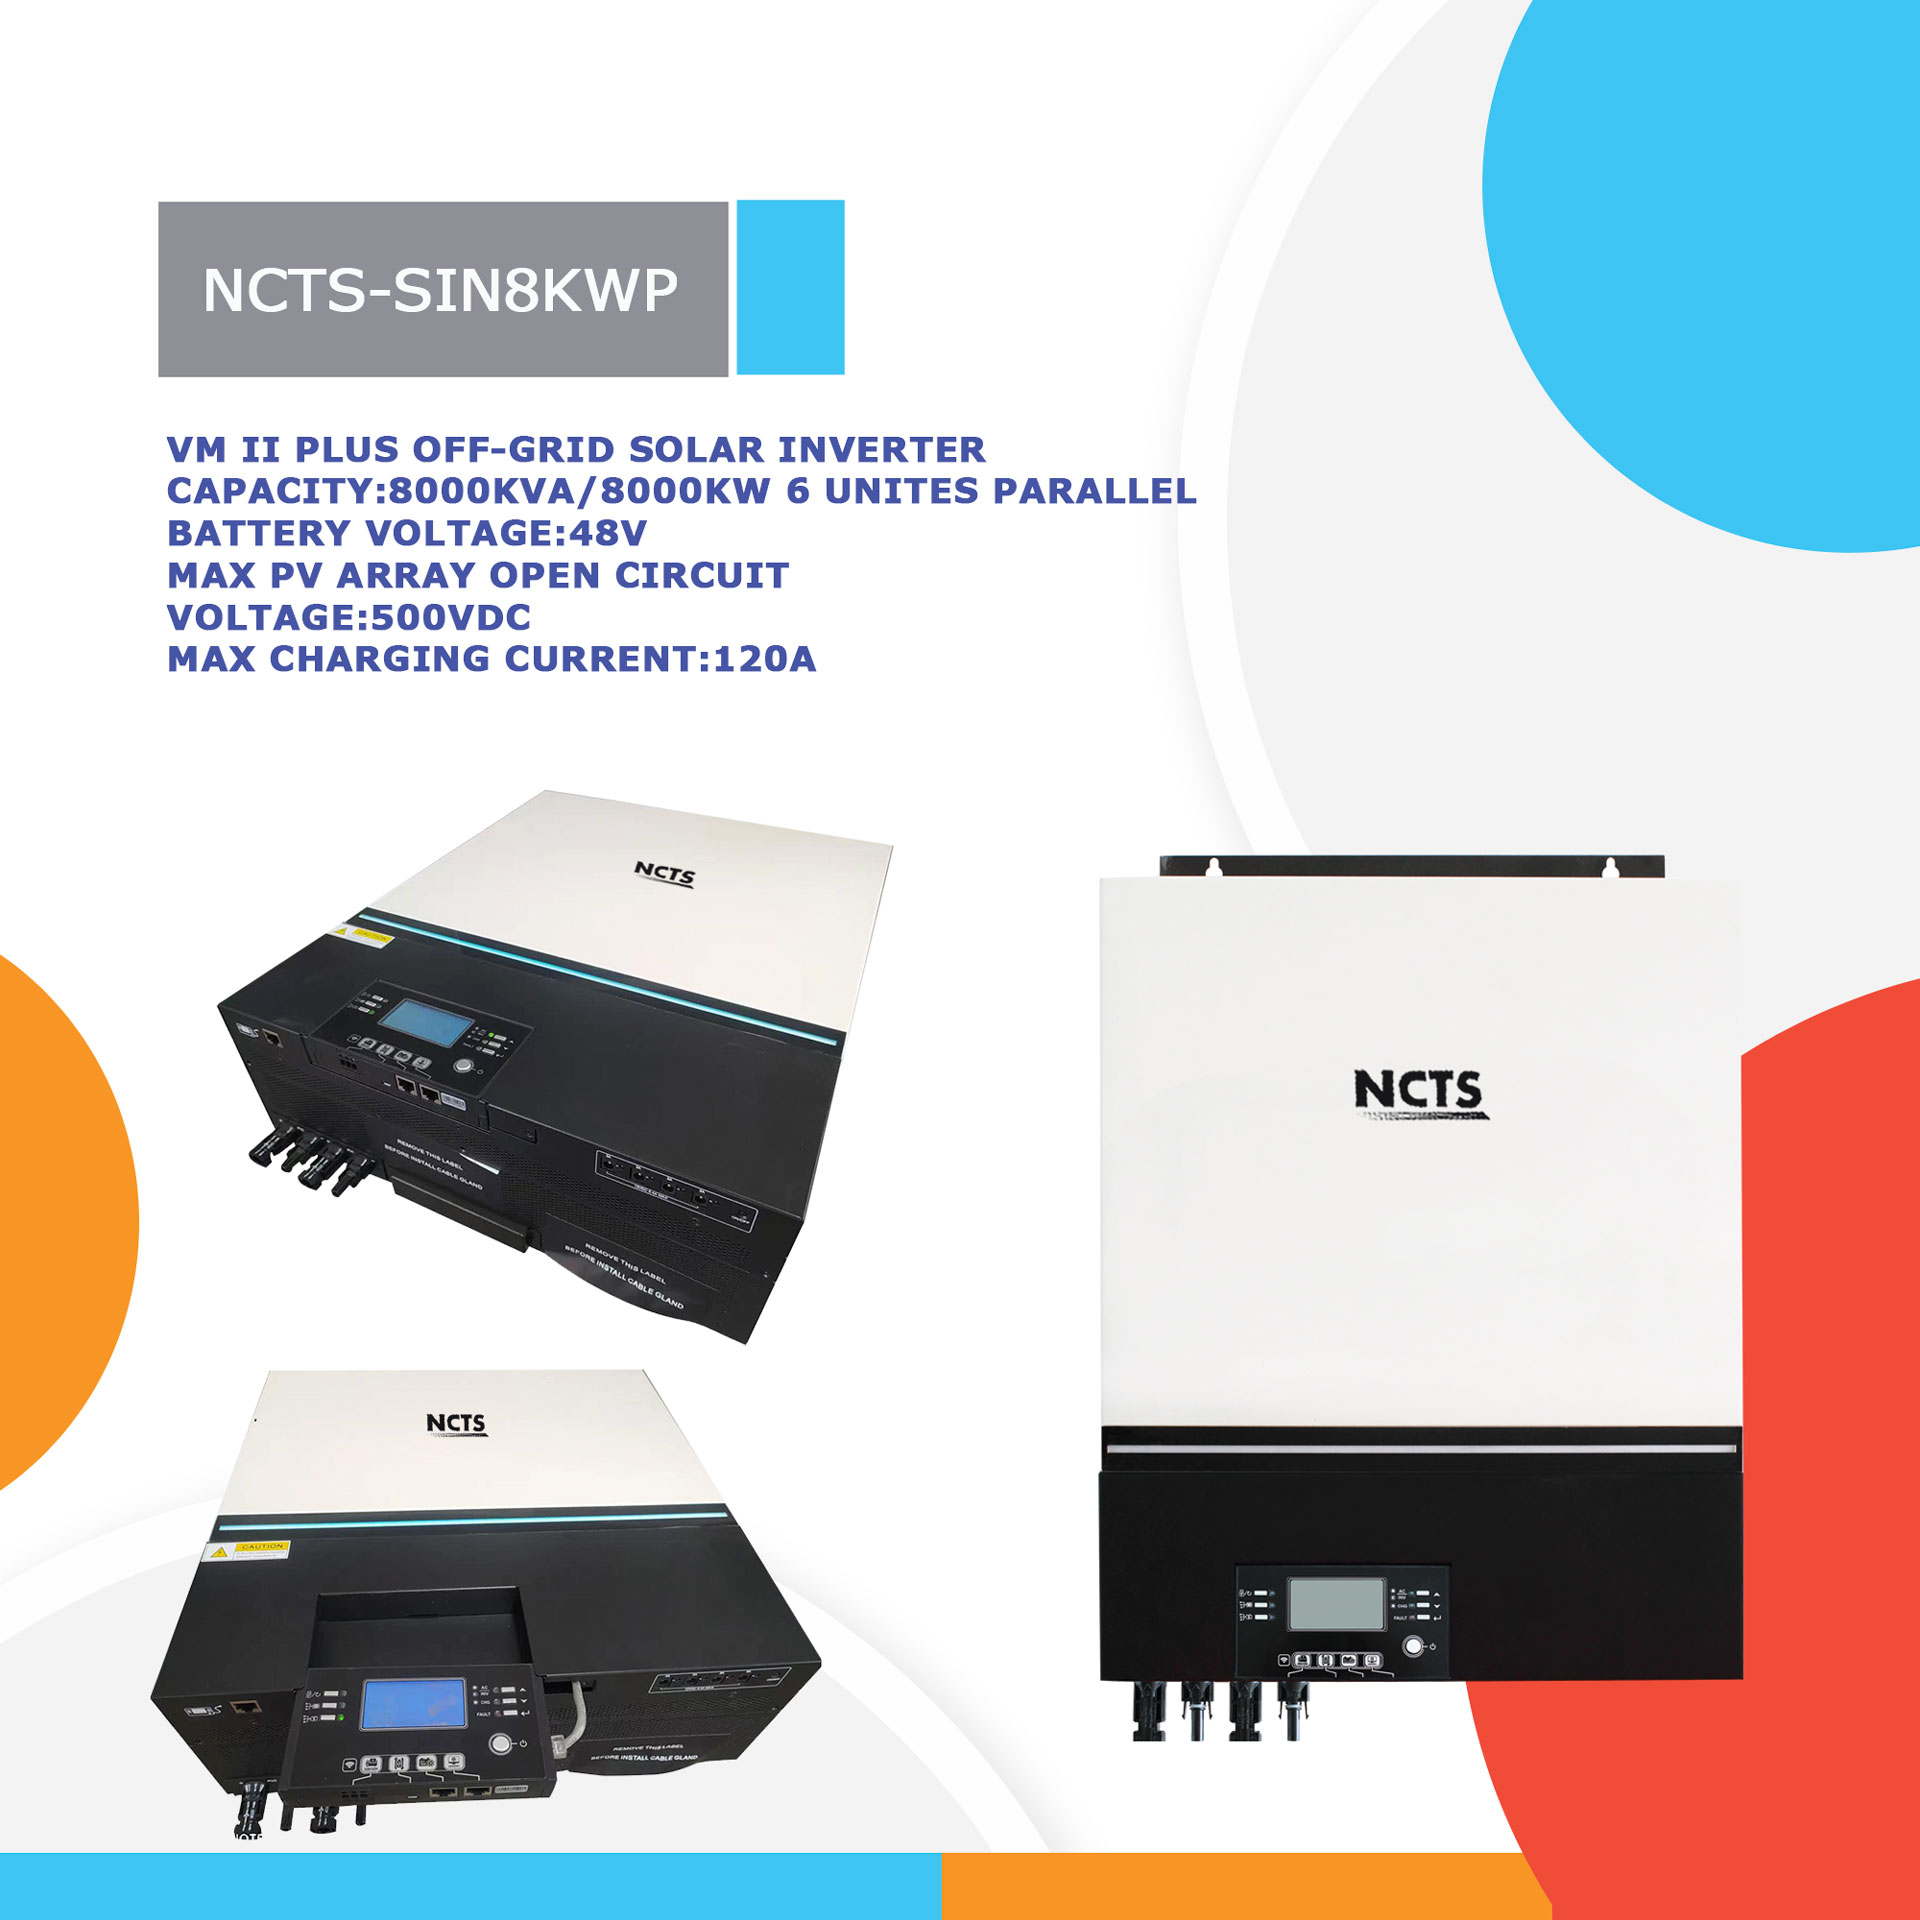 NCTS-SIN8KW